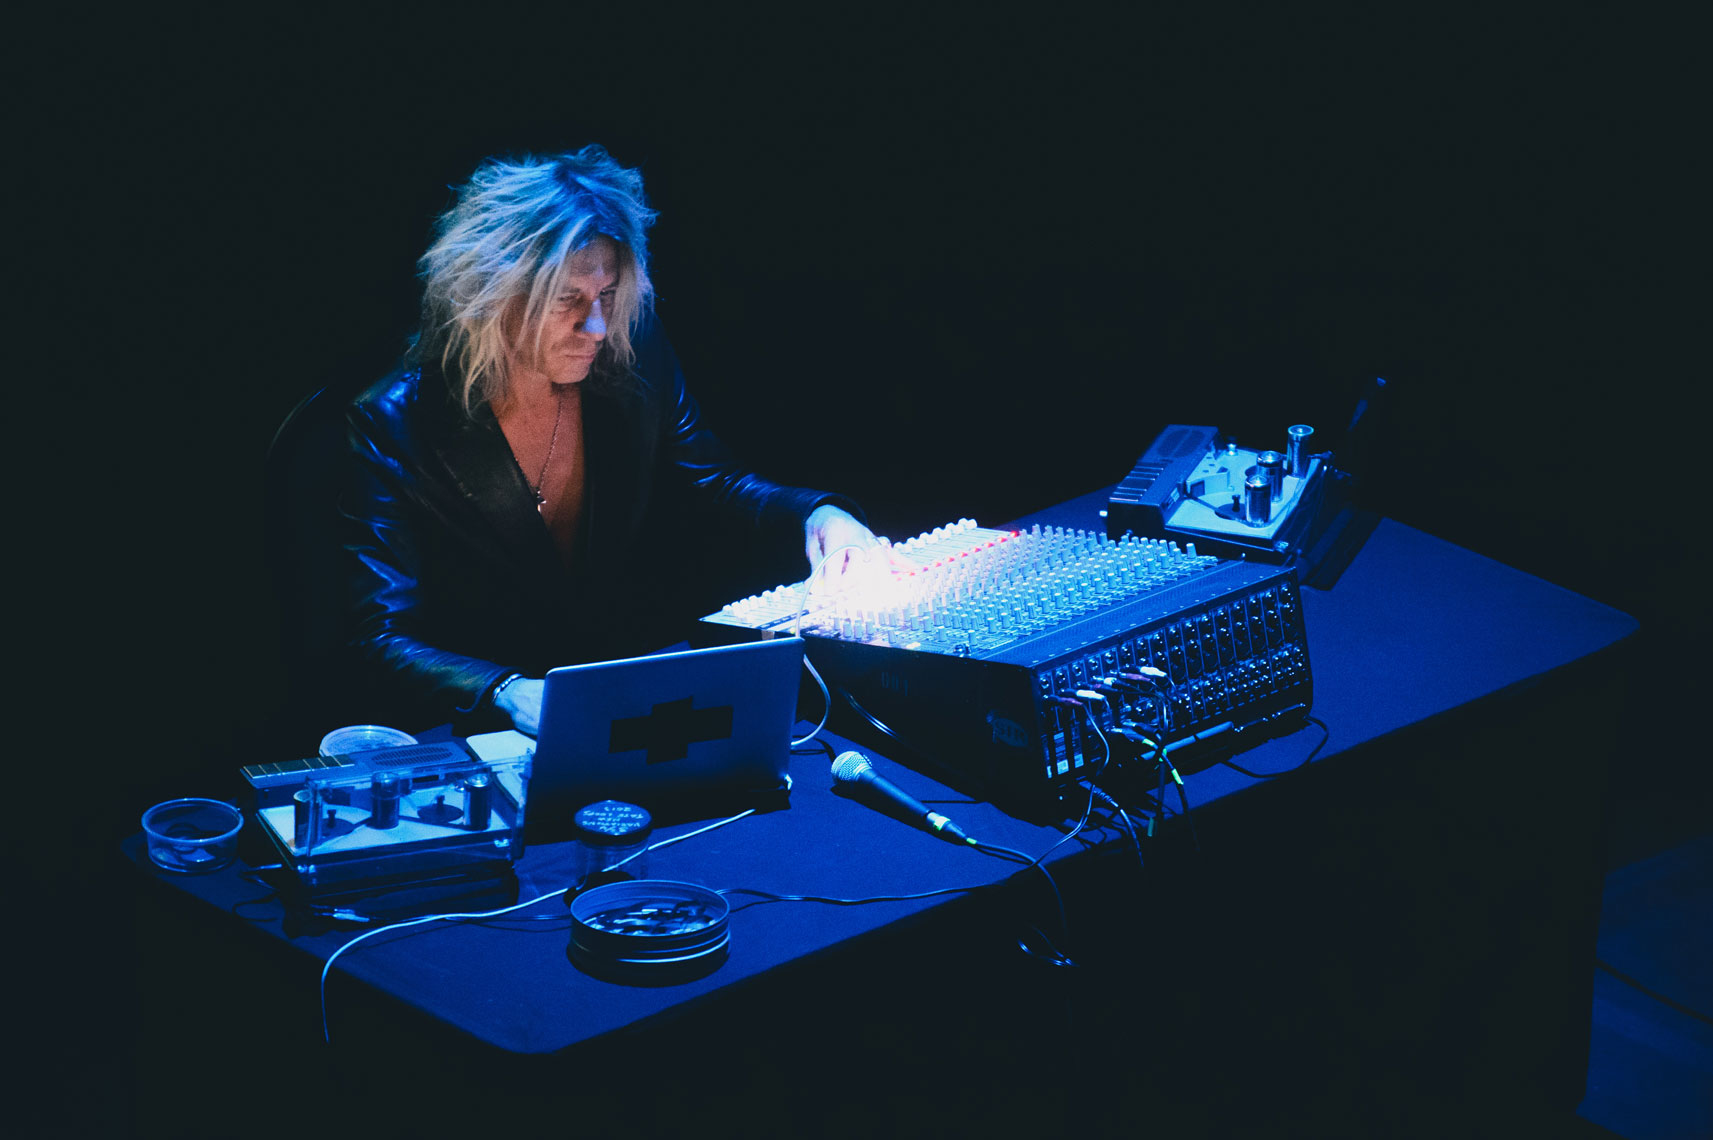 William-Basinski-performs-at-the-2013-Mountain-Oasis-Electronic-Music-Summit